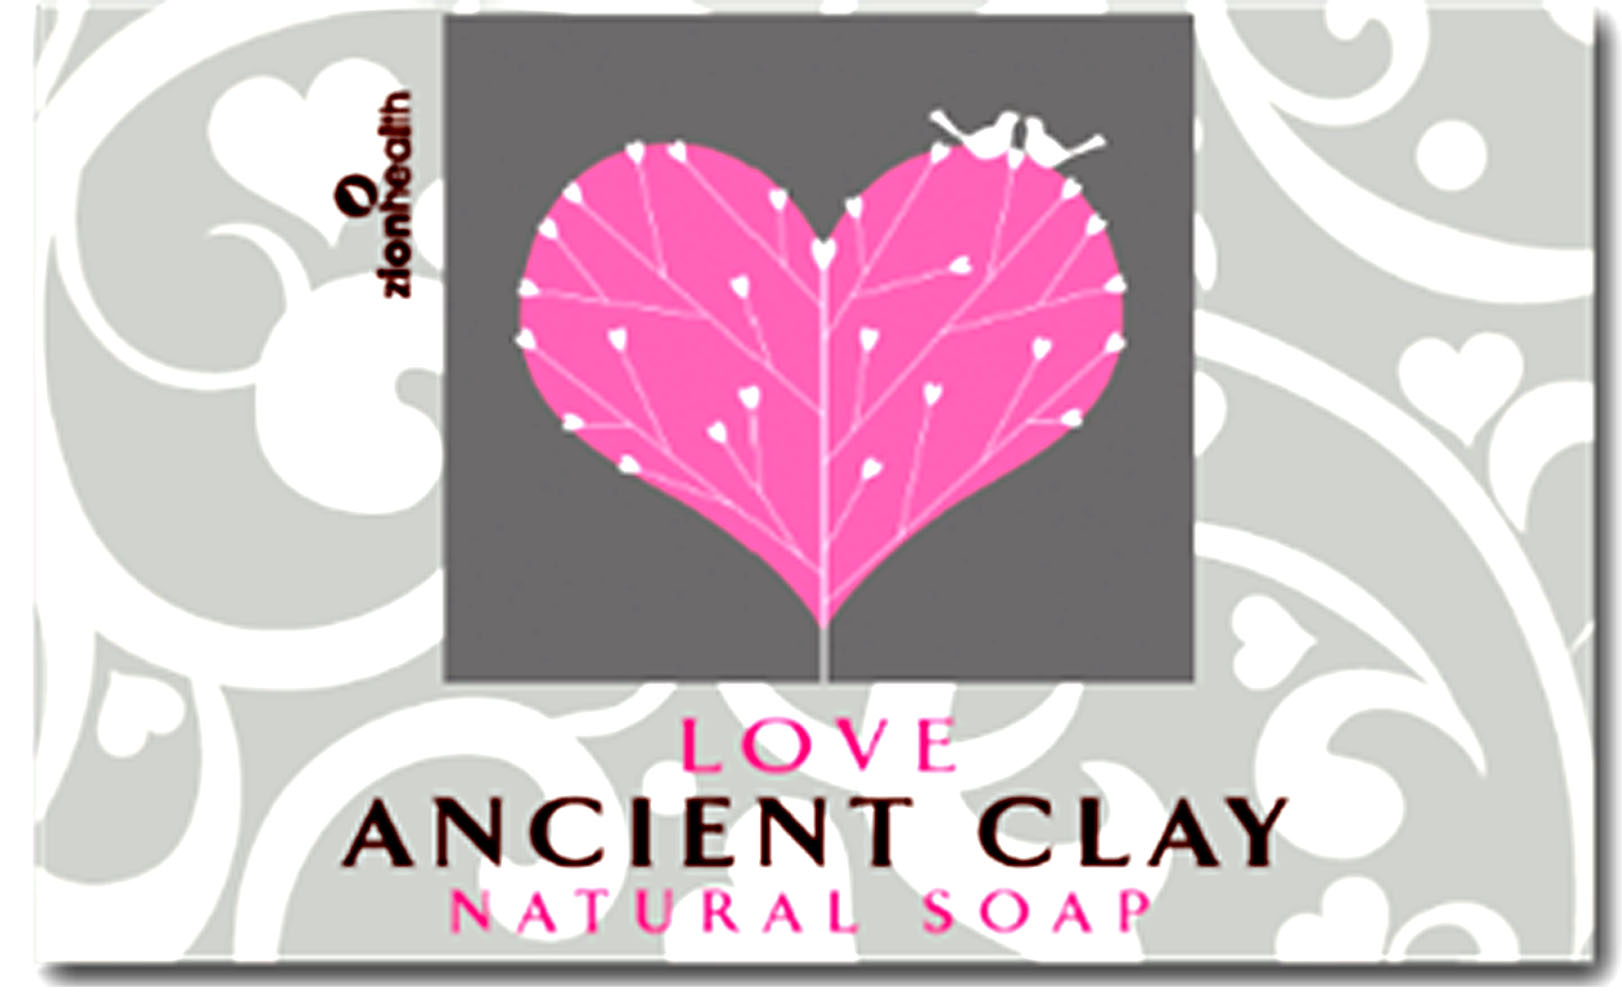 Ancient Clay Soap - Spread Love, Find Love, Love Yourself